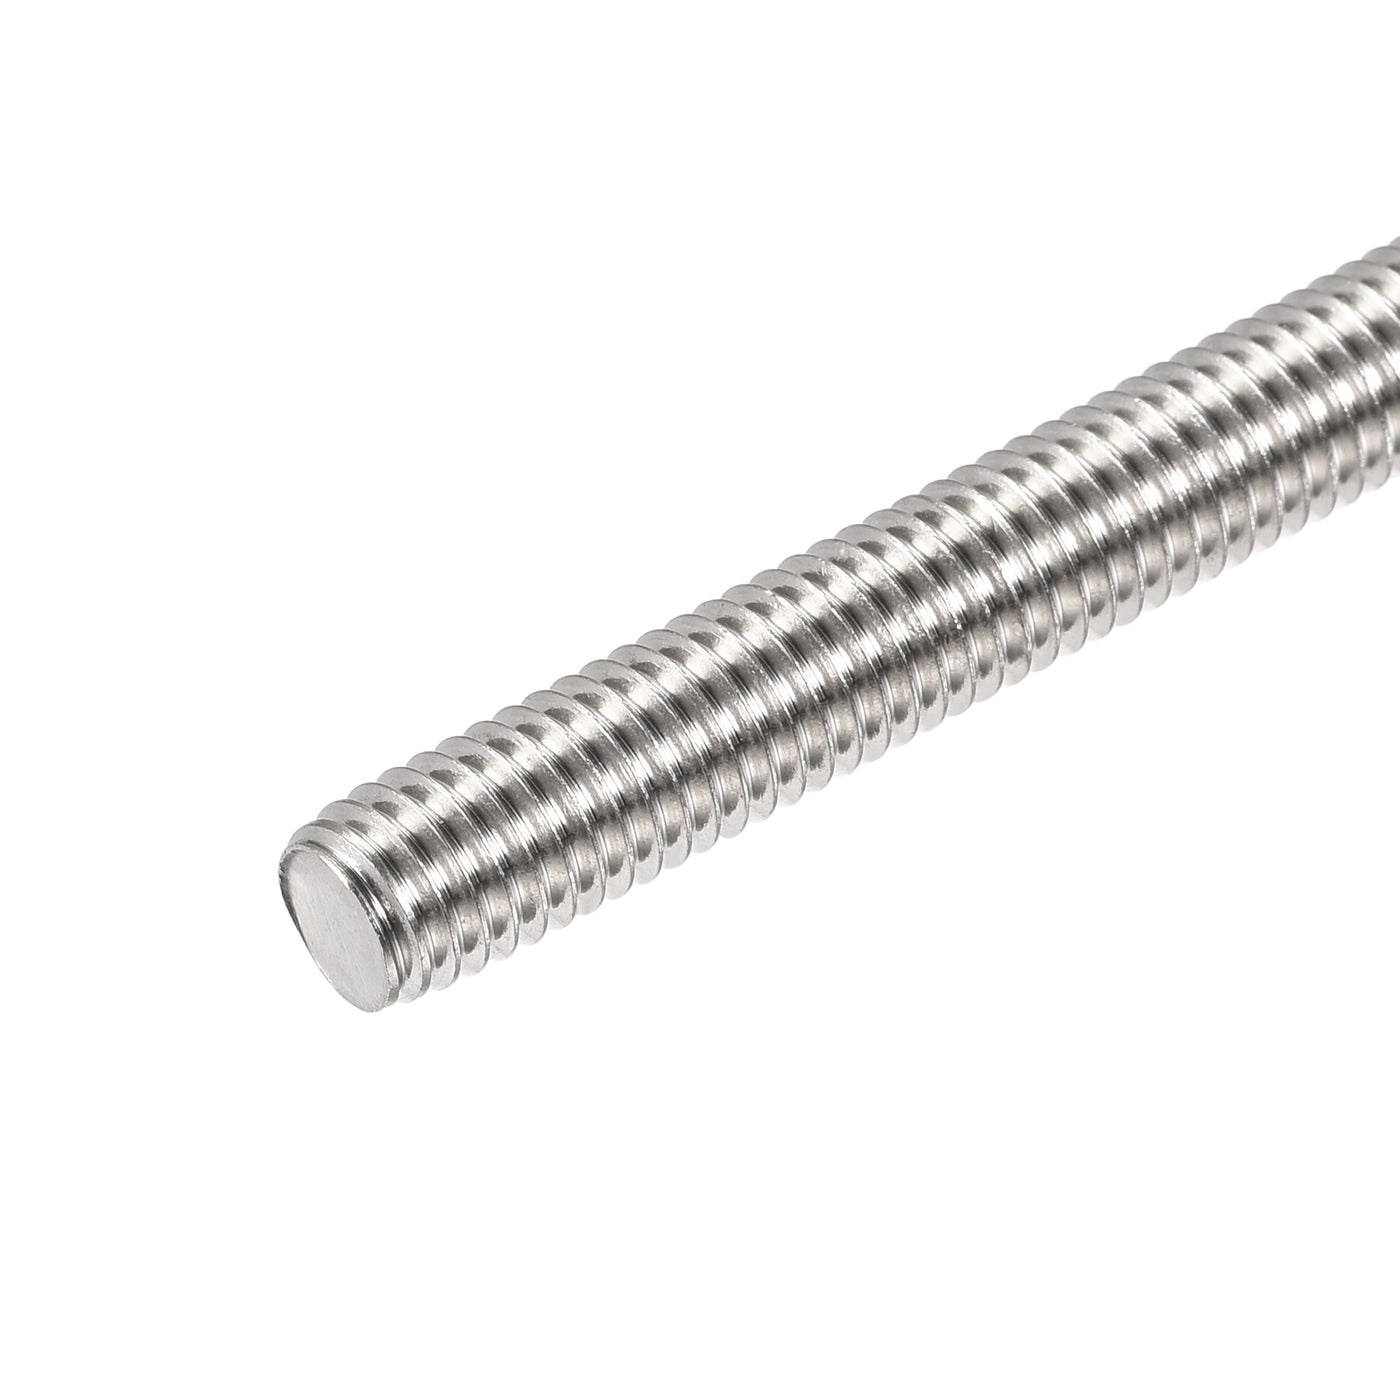 uxcell Uxcell 15pcs M8 x 60mm Fully Threaded Rod 304 Stainless Steel Right Hand Threads